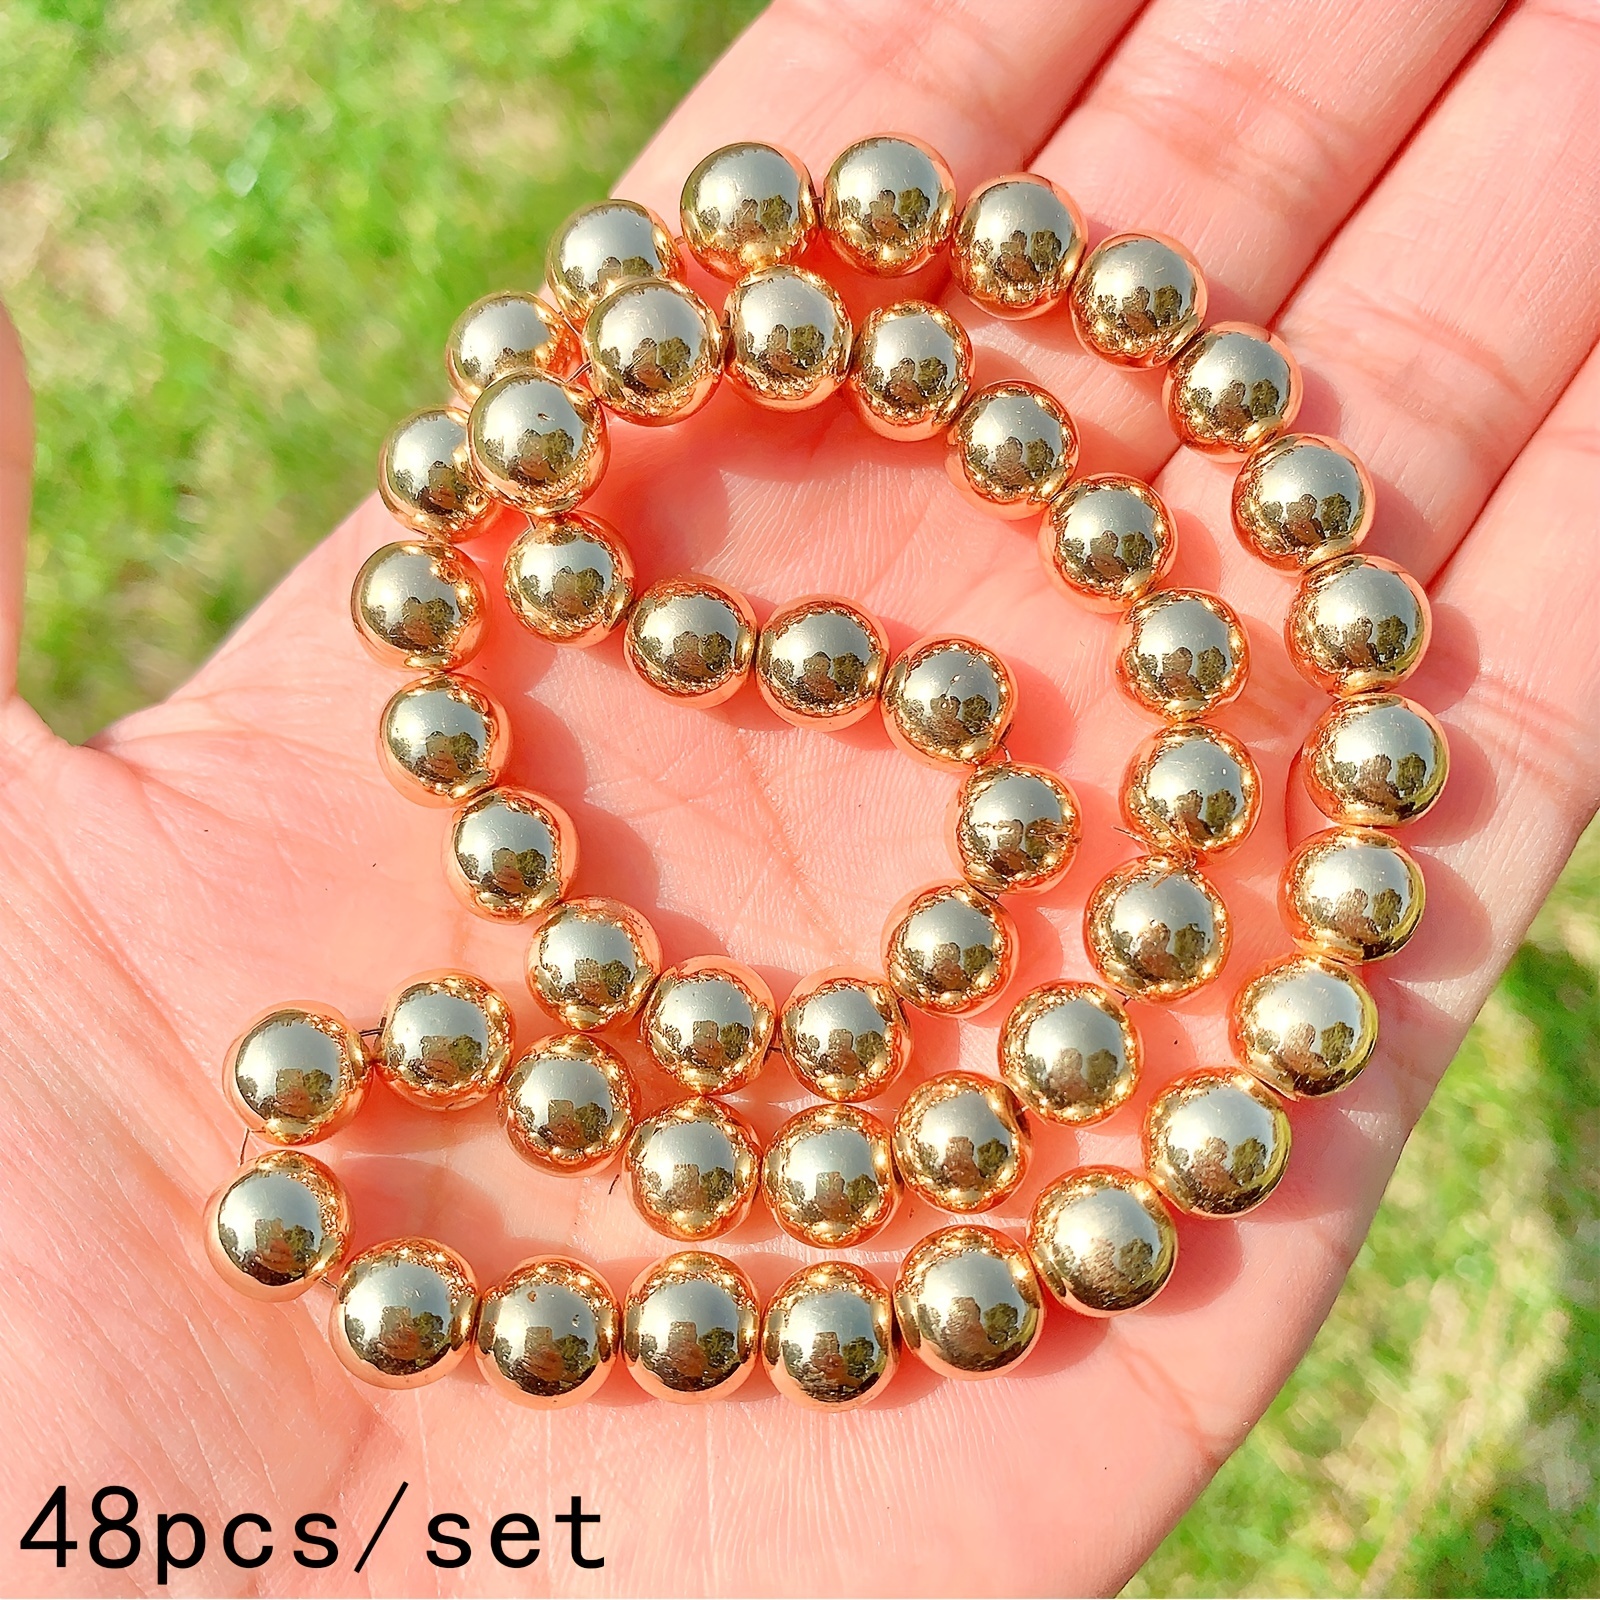 Diy Jewelry Gold Spacer Beads  8mm Gold Plated Spacer Beads